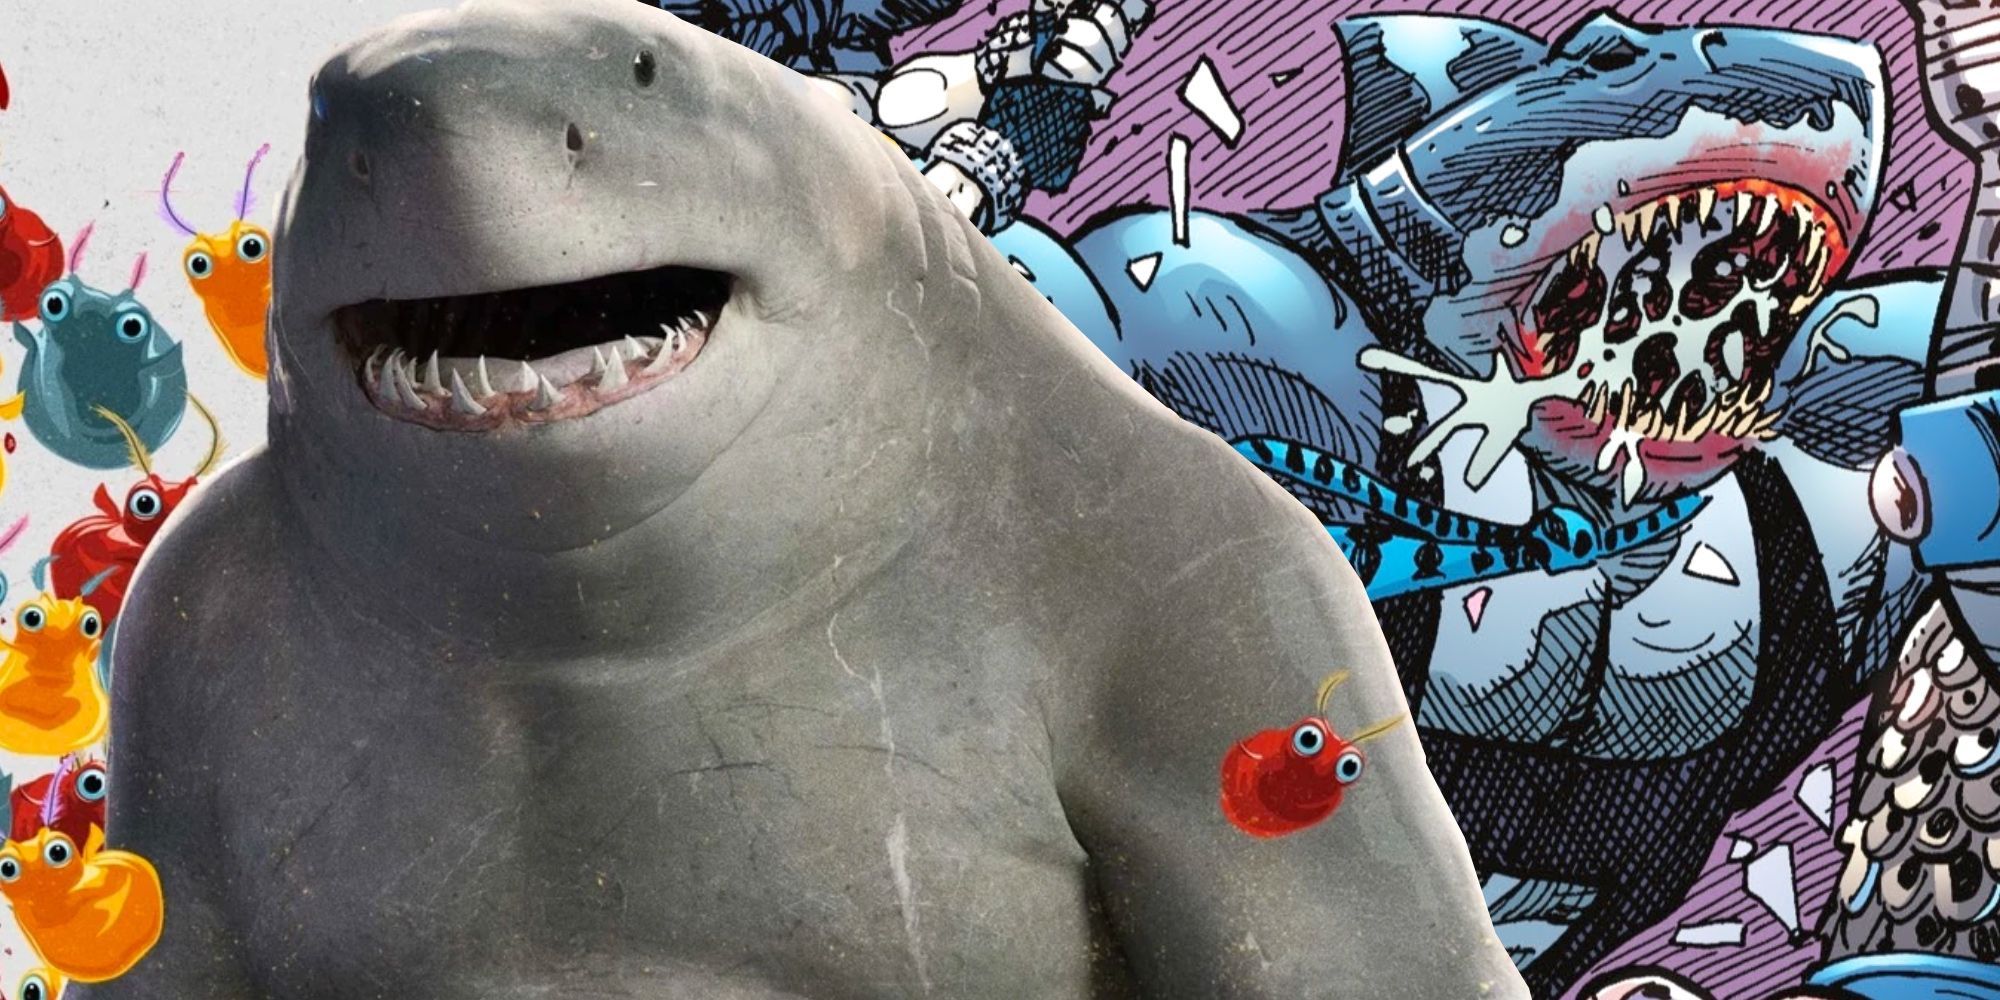 DC's King Shark in The Suicide Squad